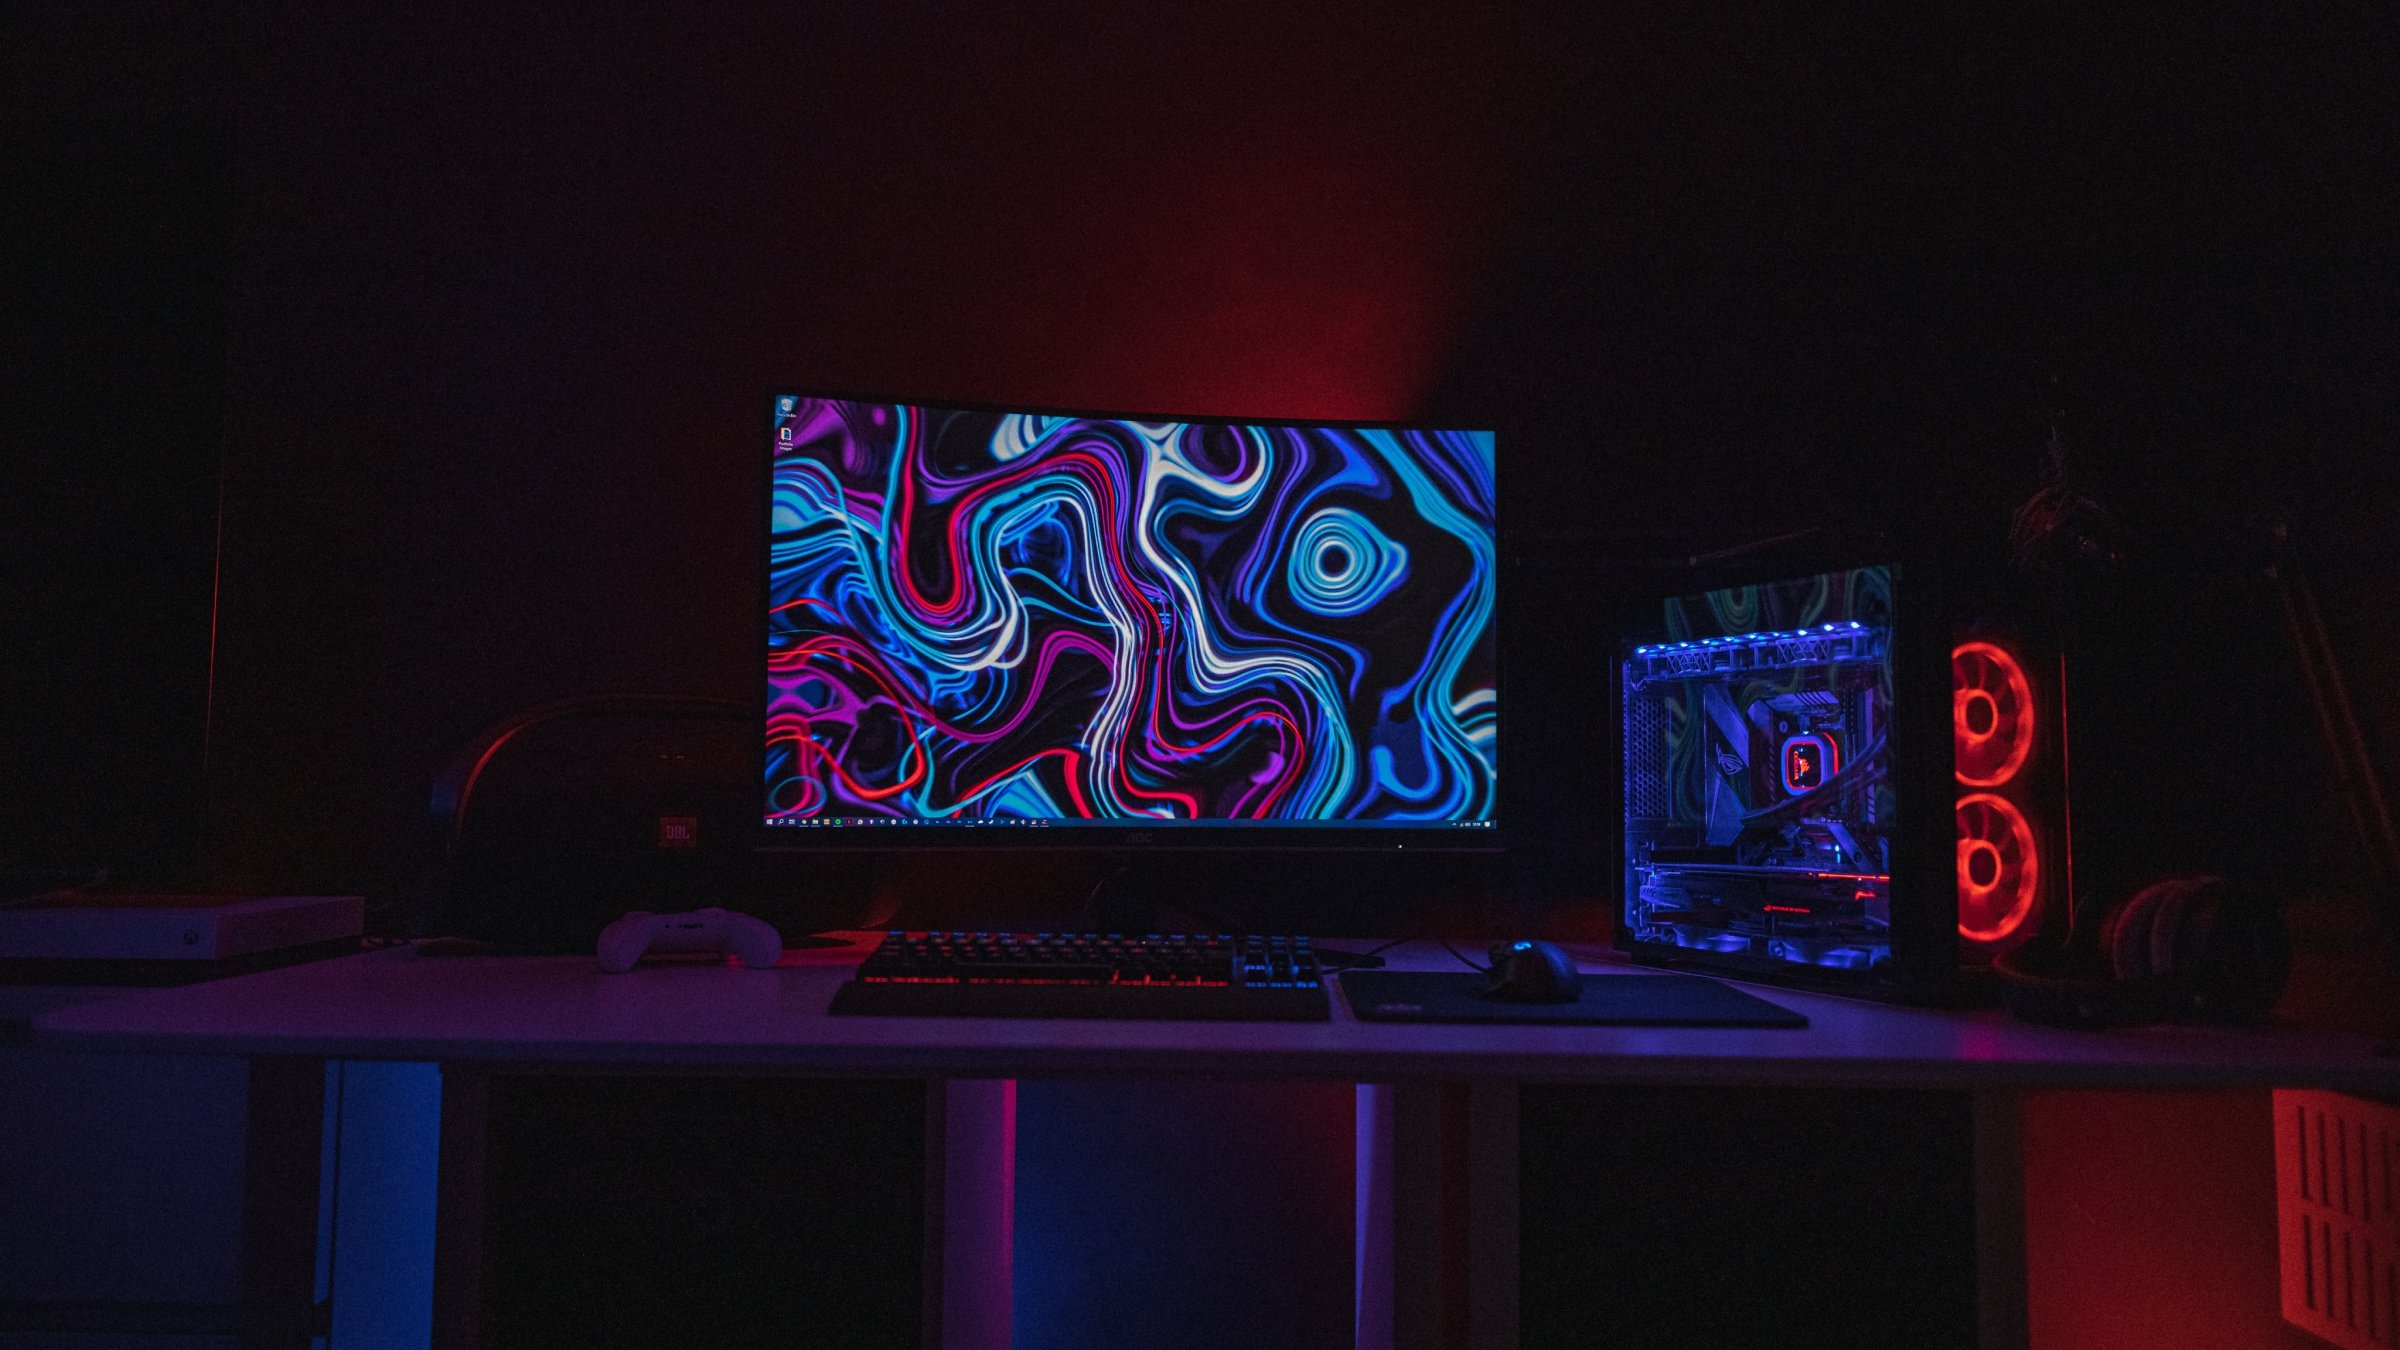 Read full post: The Beginner's Guide to Creating your Dream Gaming Setup